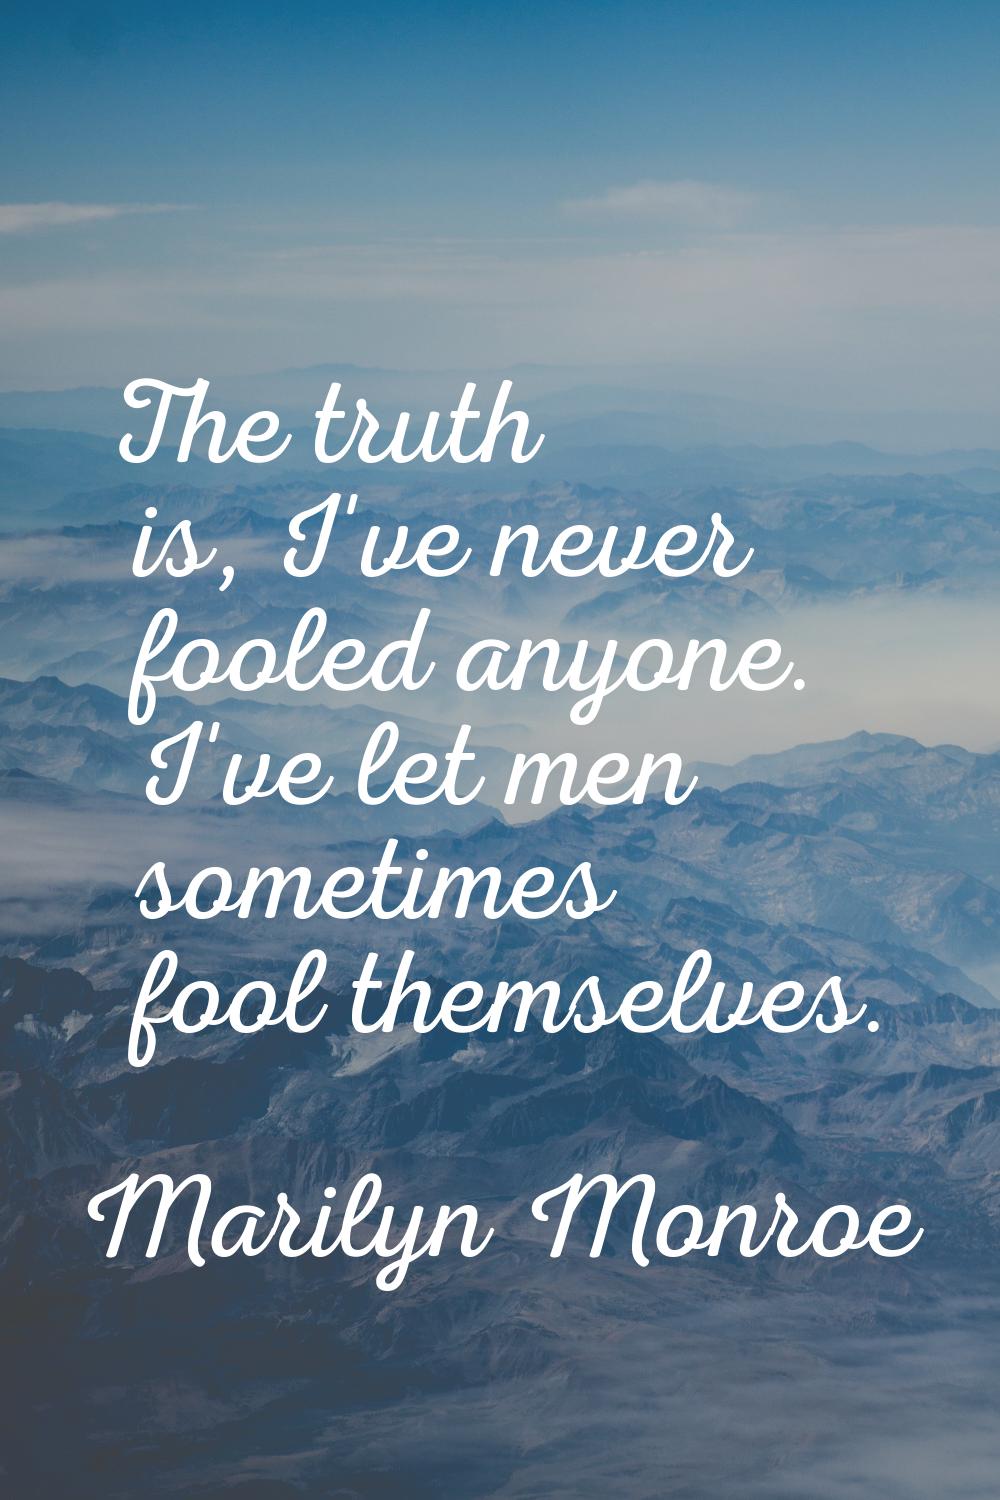 The truth is, I've never fooled anyone. I've let men sometimes fool themselves.